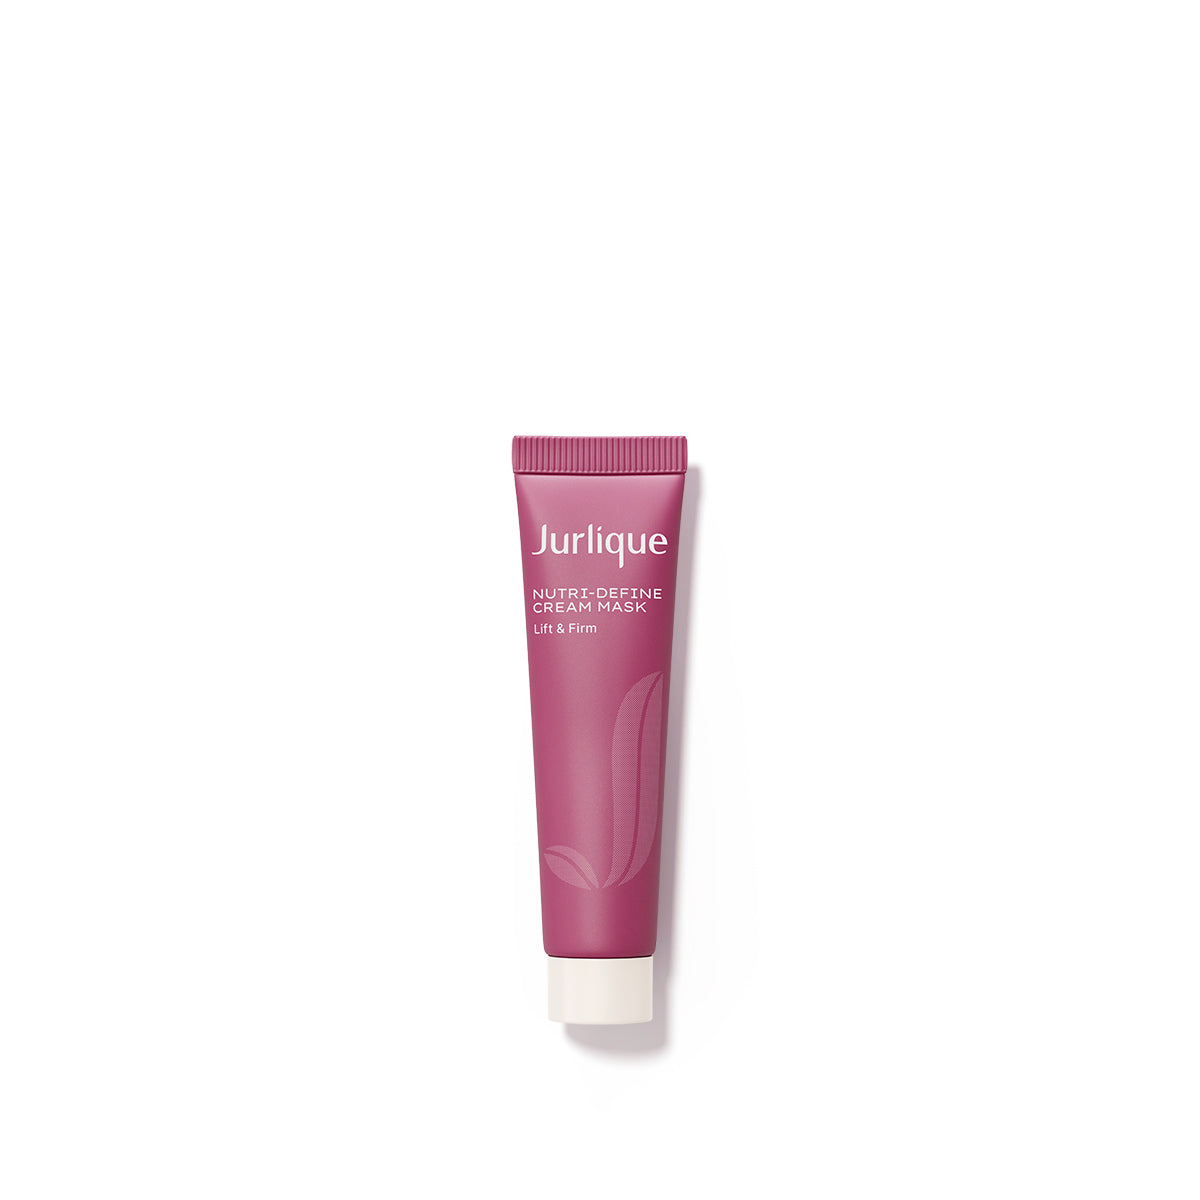 Load image into Gallery viewer, Nutri-Define Cream Mask 10mL
